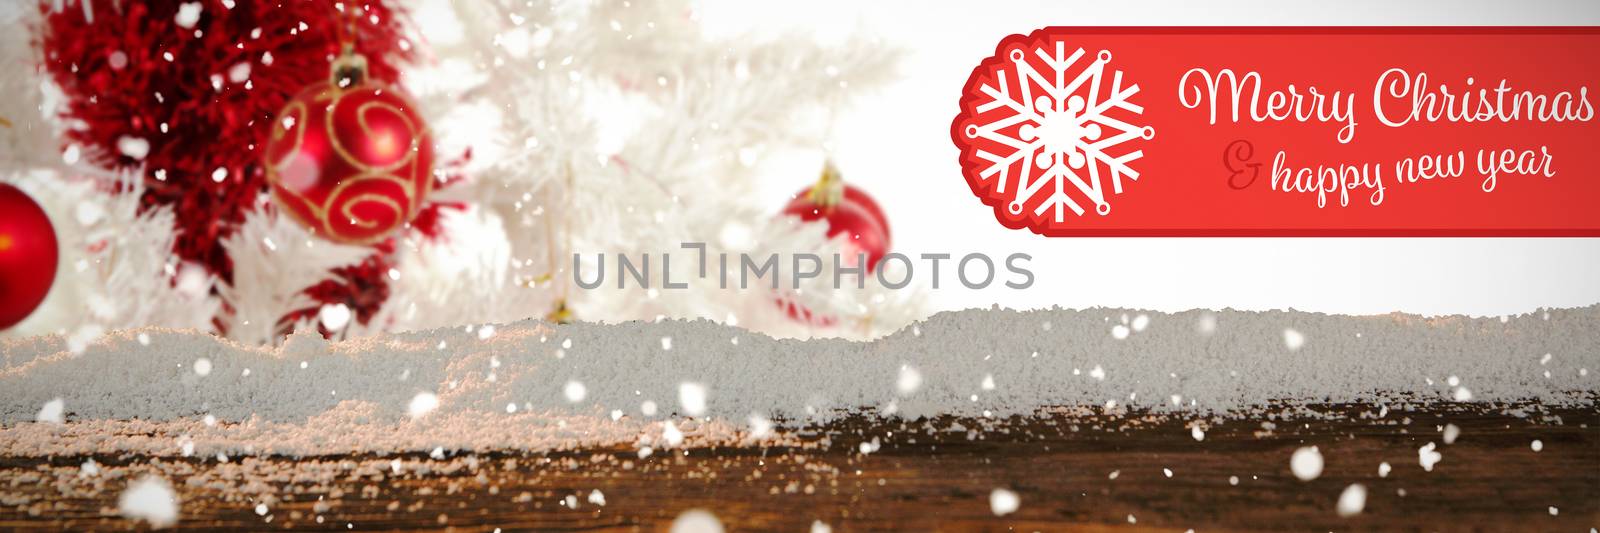 Banner Merry Christmas against red and white christmas decorations